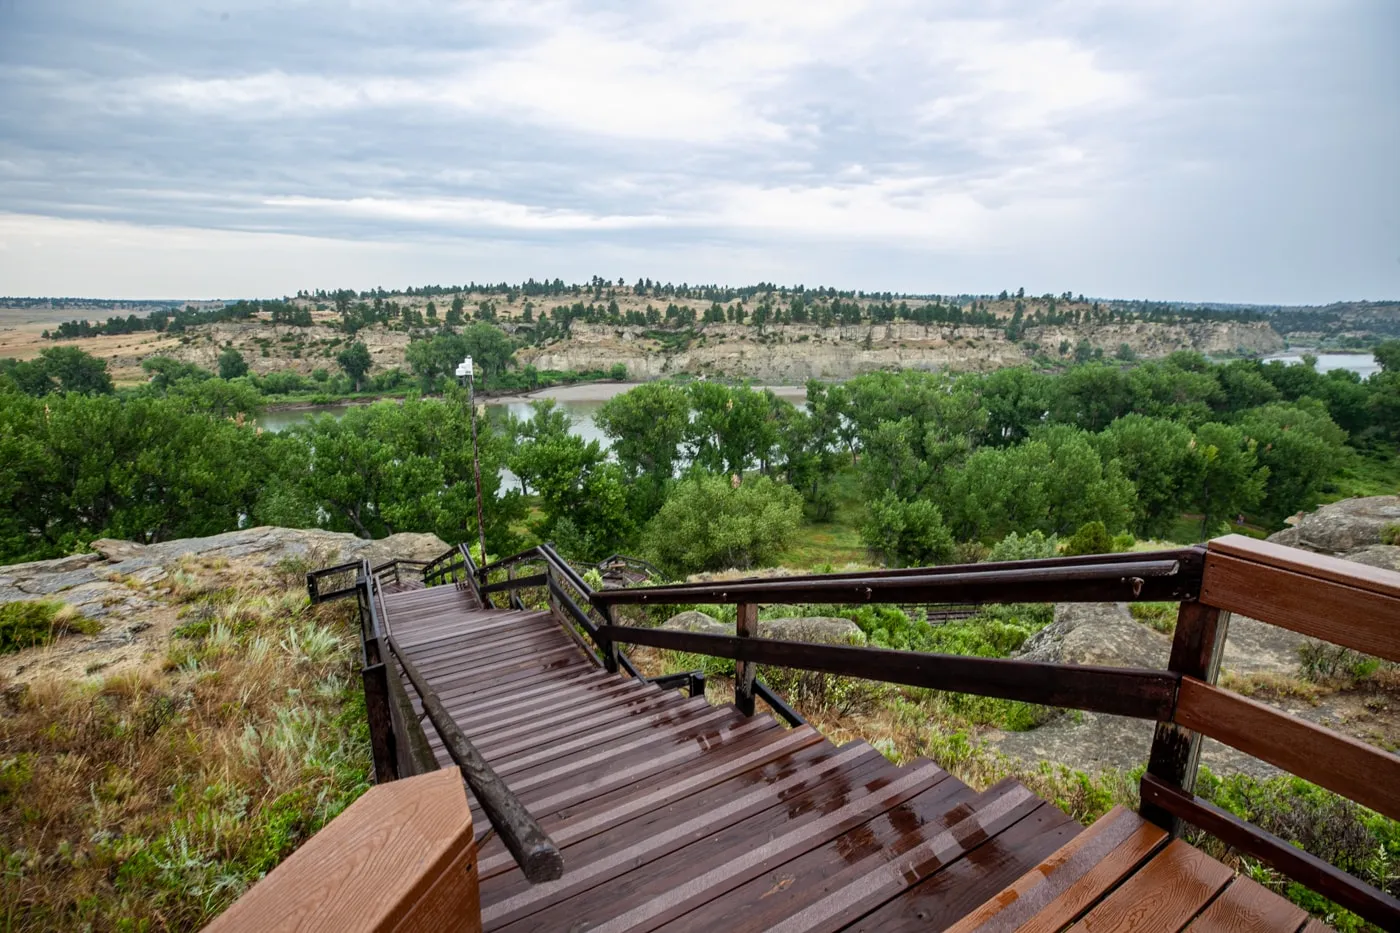 Pompeys Pillar National Monument in Montana | William Clark (Lewis & Clark) carved his name and the date of his visit on a rock bluff next to the Yellowstone River. | Montana tourist attractions and historical monuments